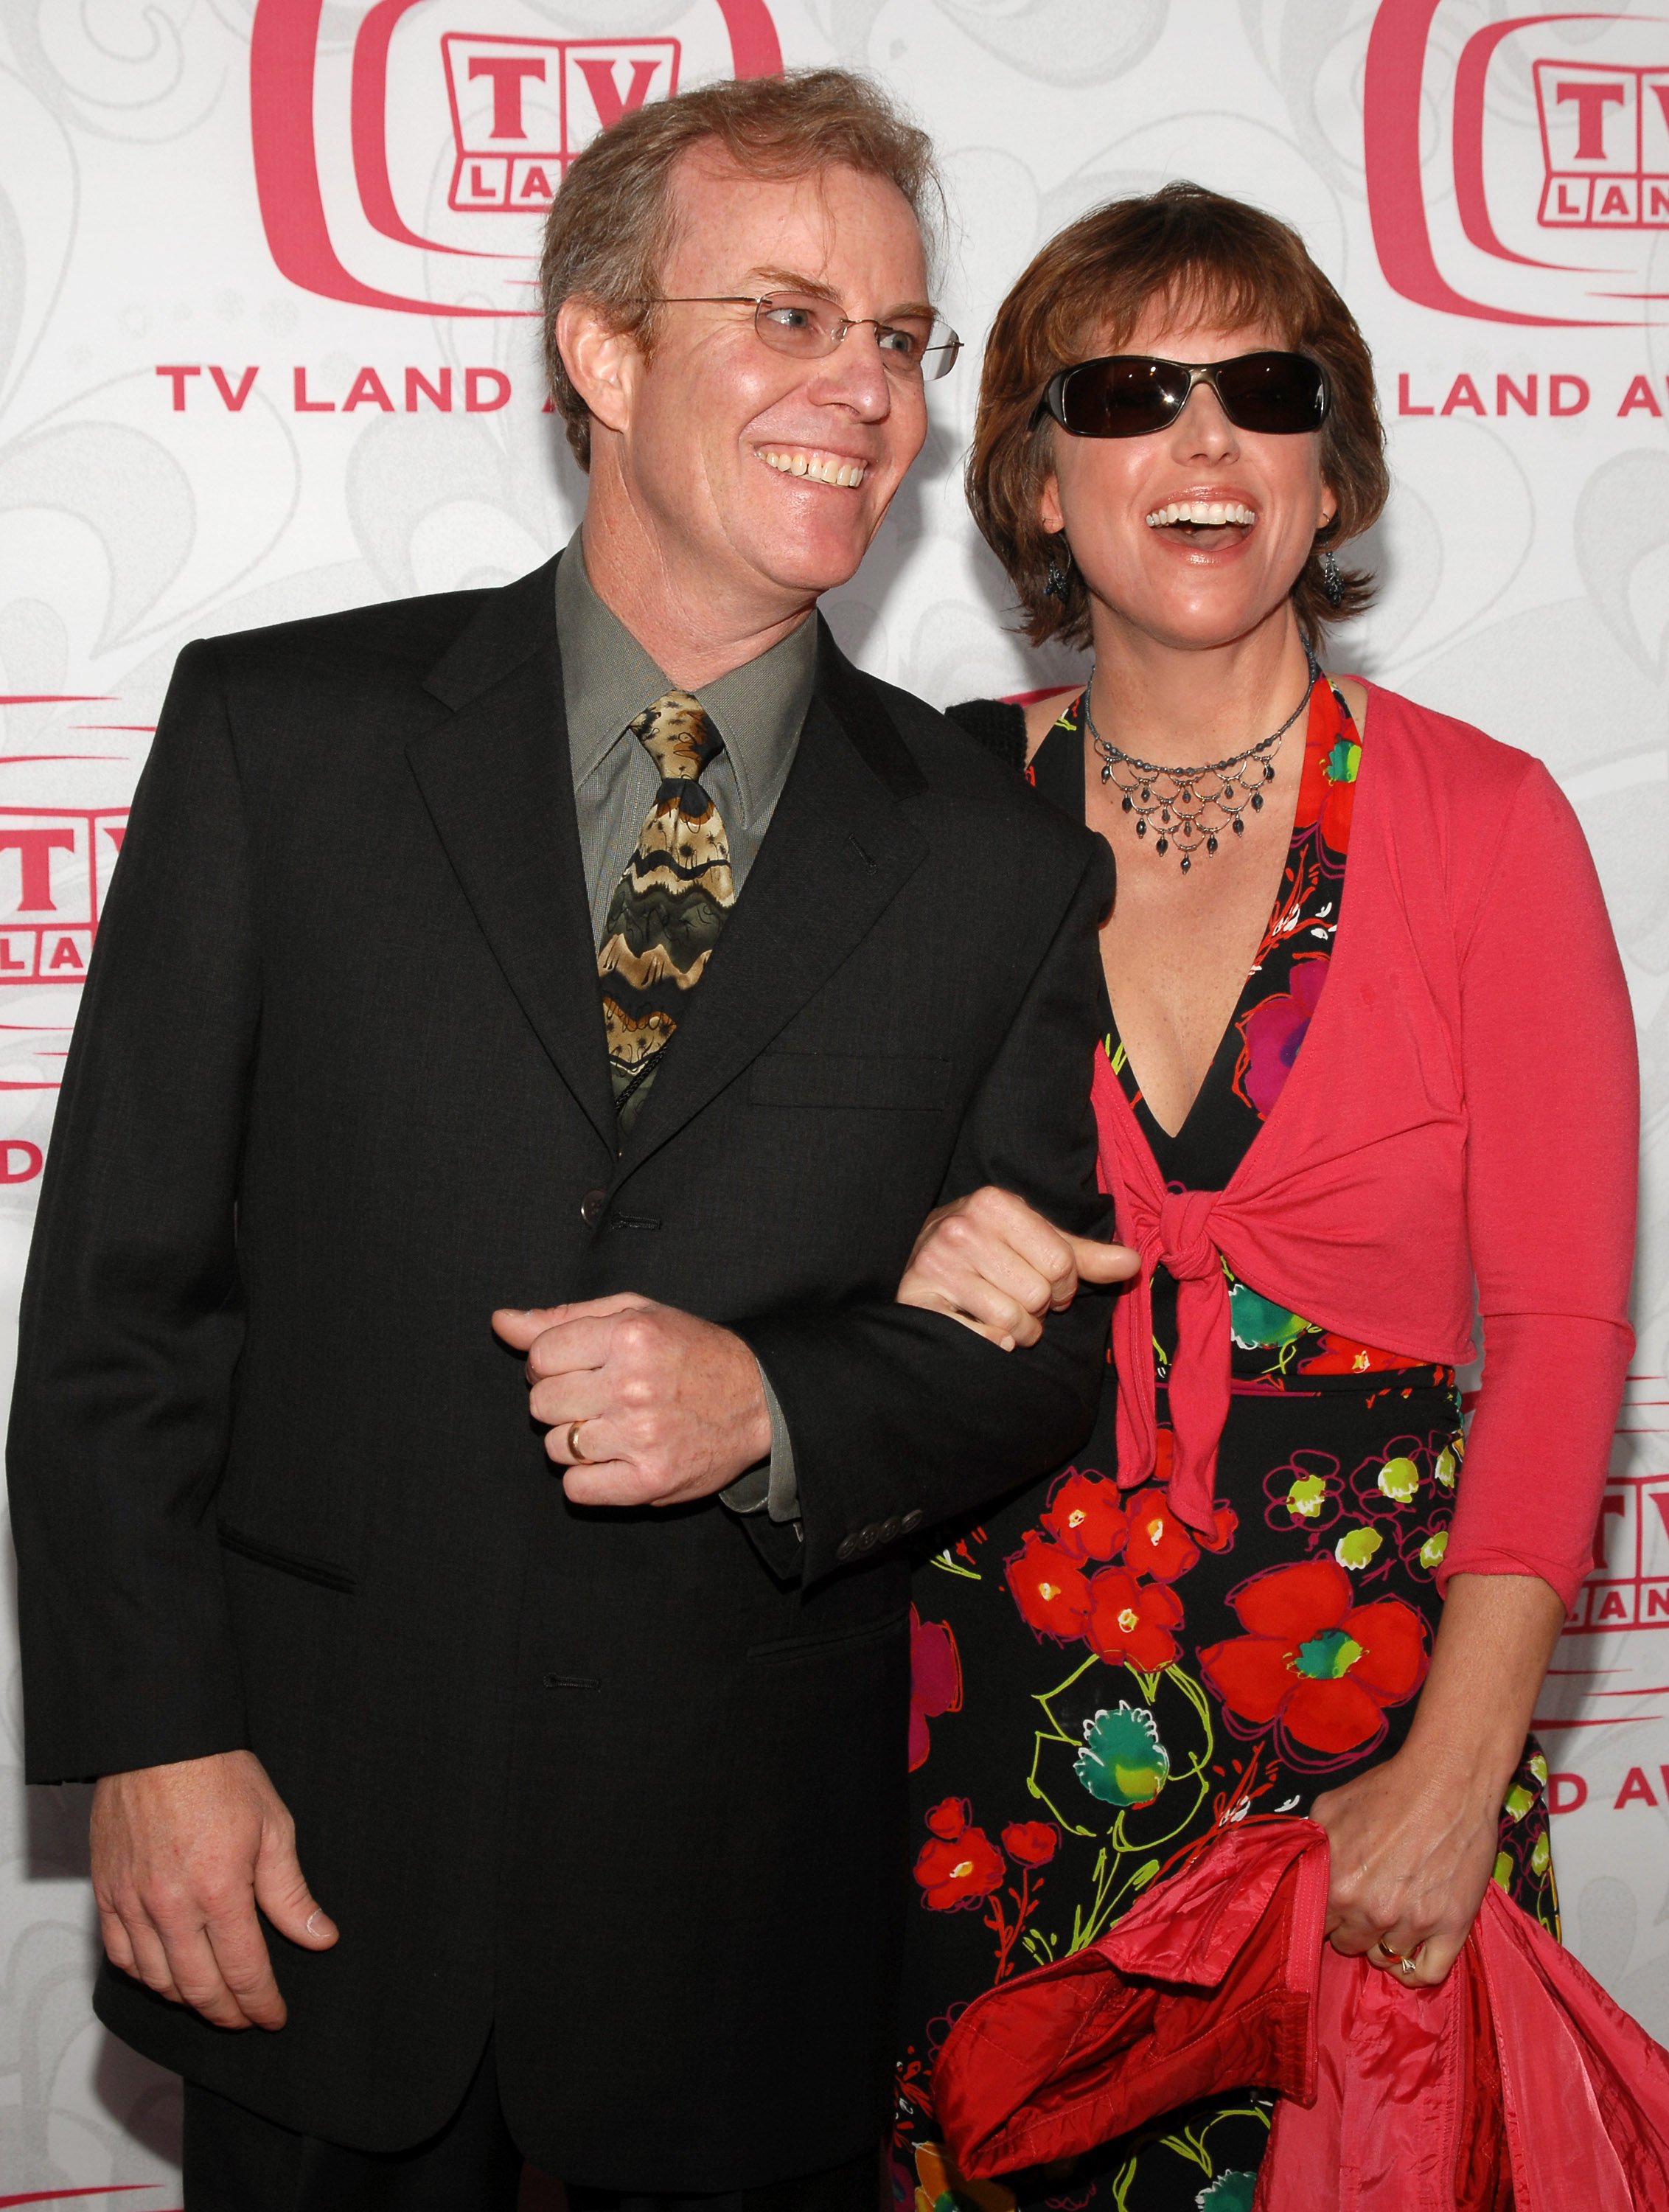 Mike Lookinland and a guest during the 5th Annual TV Land Awards in Santa Monica, California on April 14, 2007 | Source: Getty Images